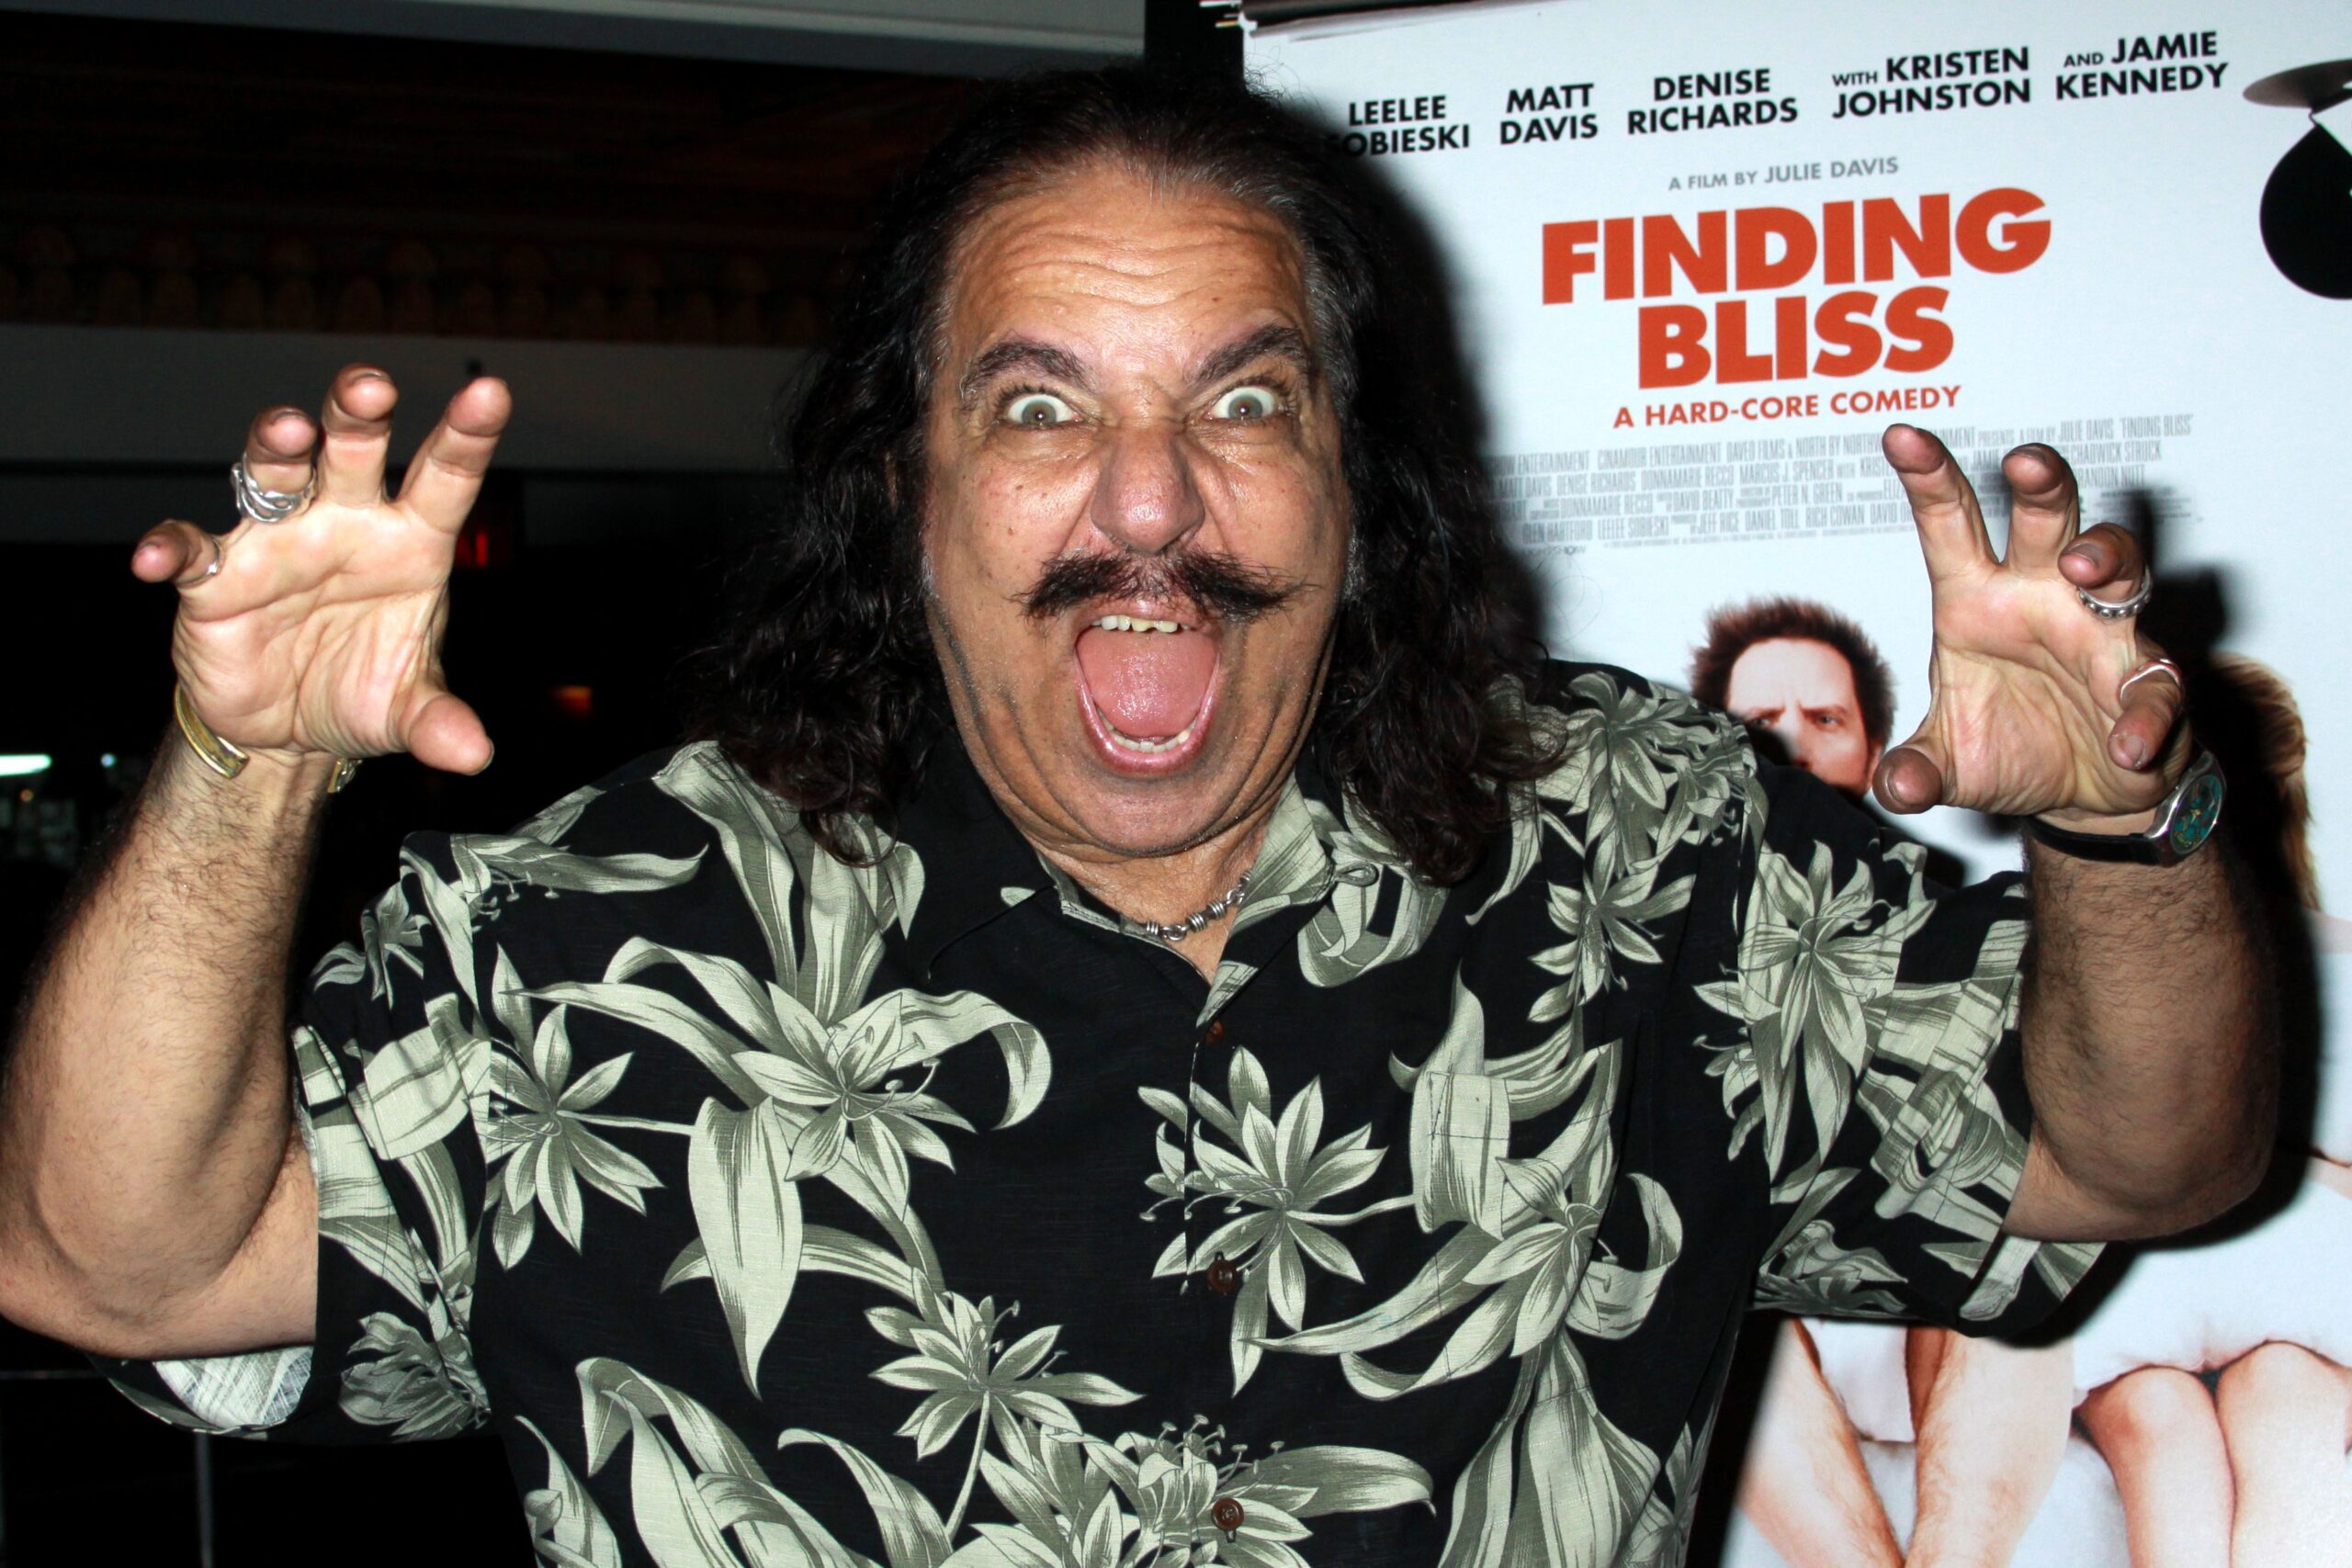 brendon kerr add images of ron jeremy photo